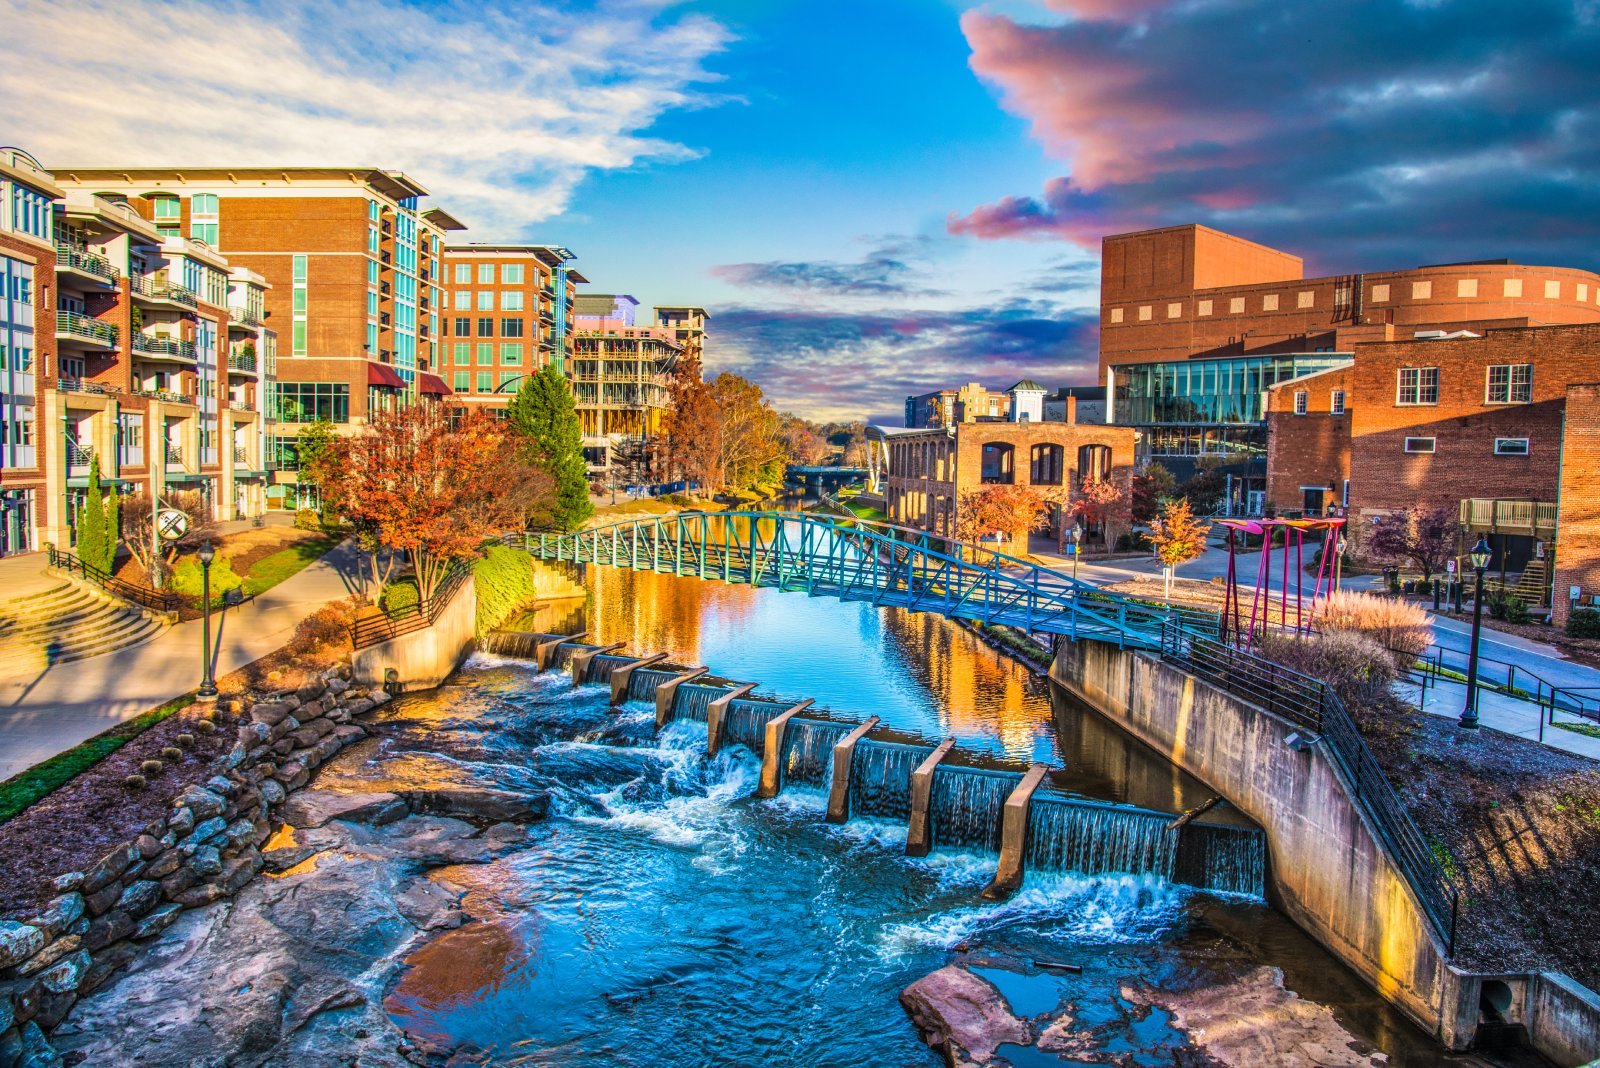 <p class="wp-caption-text">Image Credit: Shutterstock / Kevin Ruck</p>  <p><span>Greenville pairs a stunning waterfall park with a dynamic food scene. It’s a small city with a big personality, offering trails, arts, and Southern hospitality.</span></p>